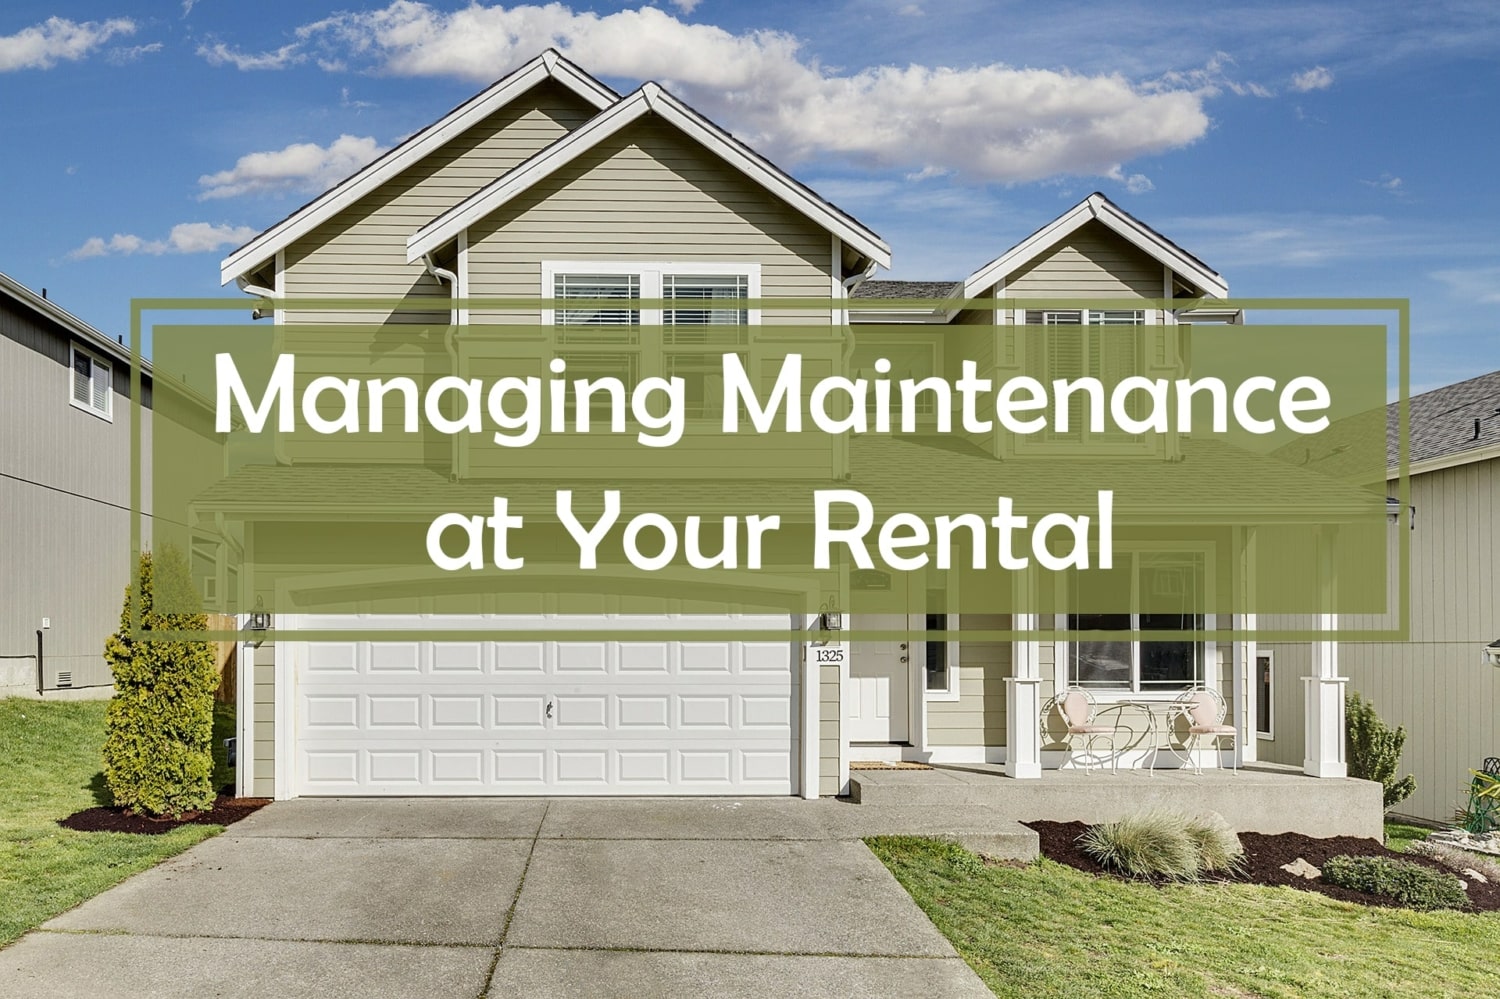 Real Property Management Colorado Get a Free Rental Analysis